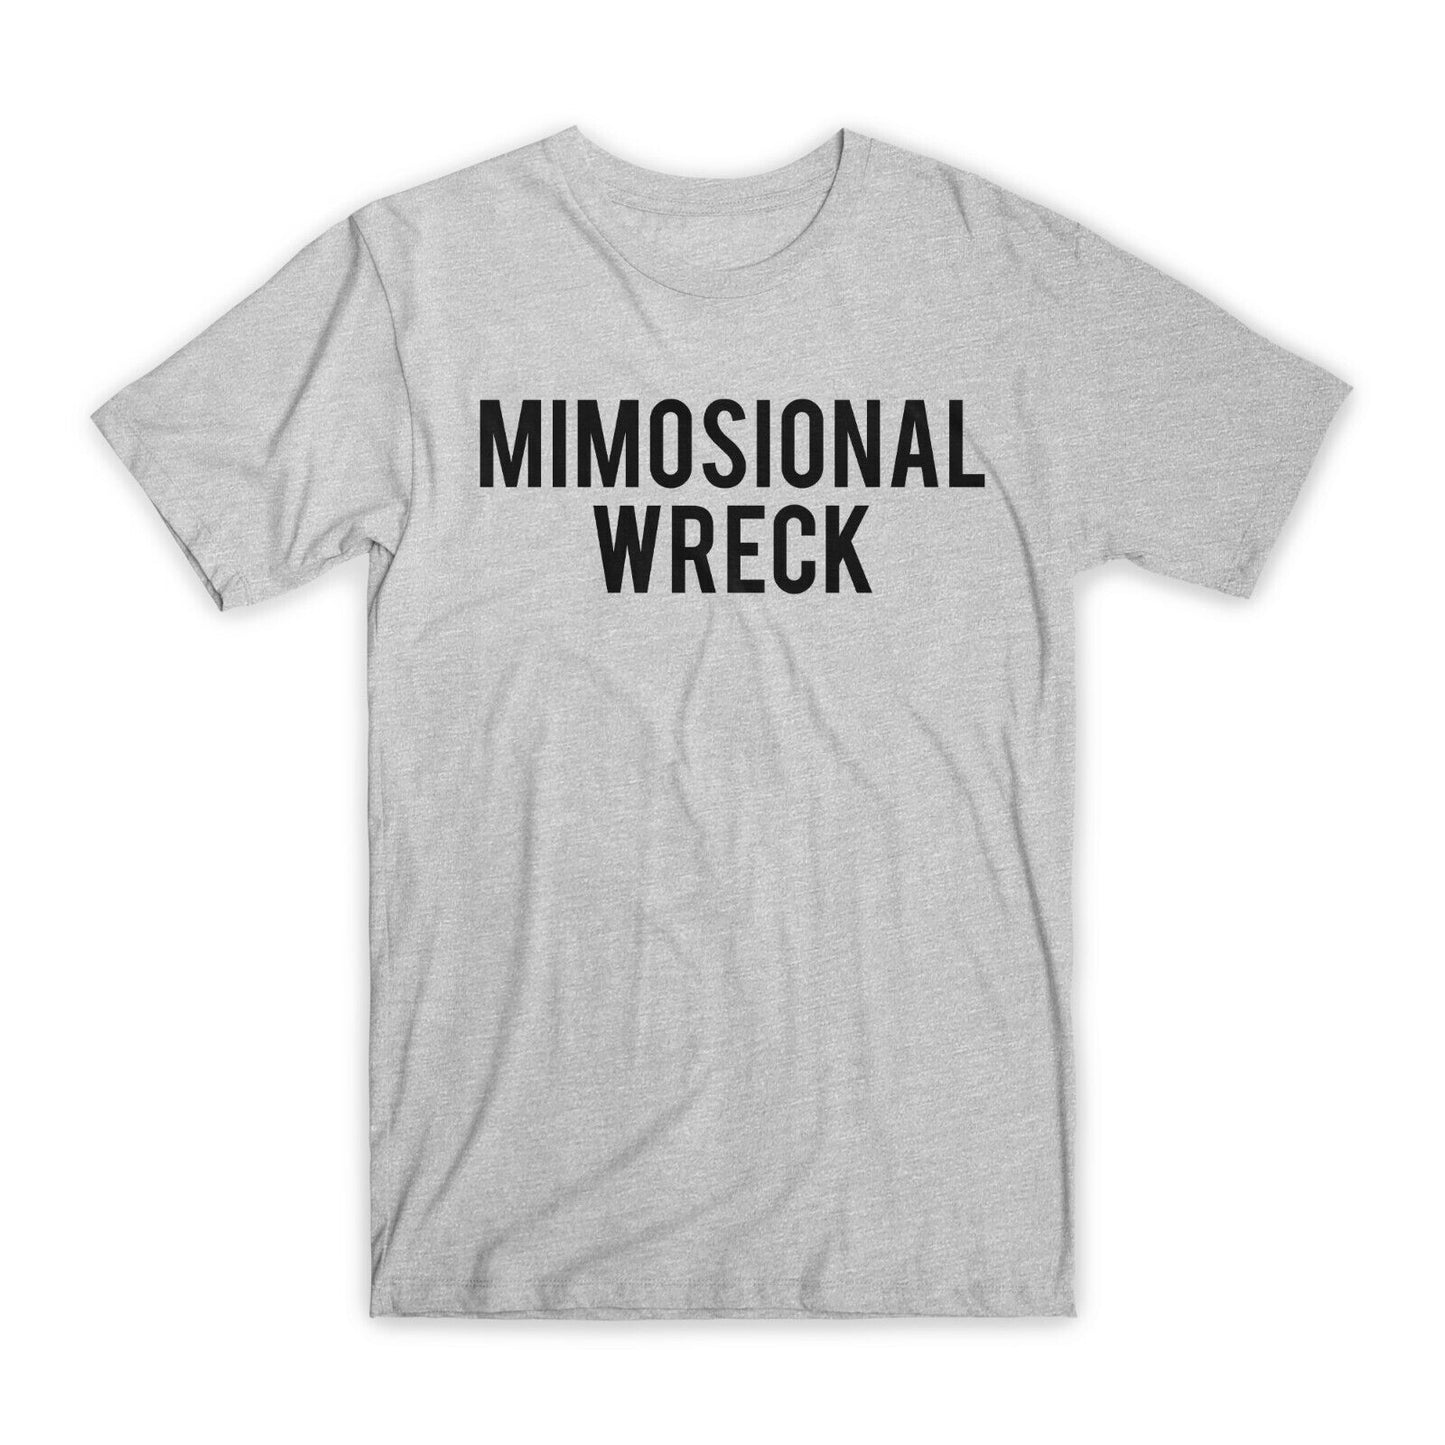 Mimosional Wreck Print T-Shirt Premium Soft Cotton Crew Neck Funny Tees Gift NEW